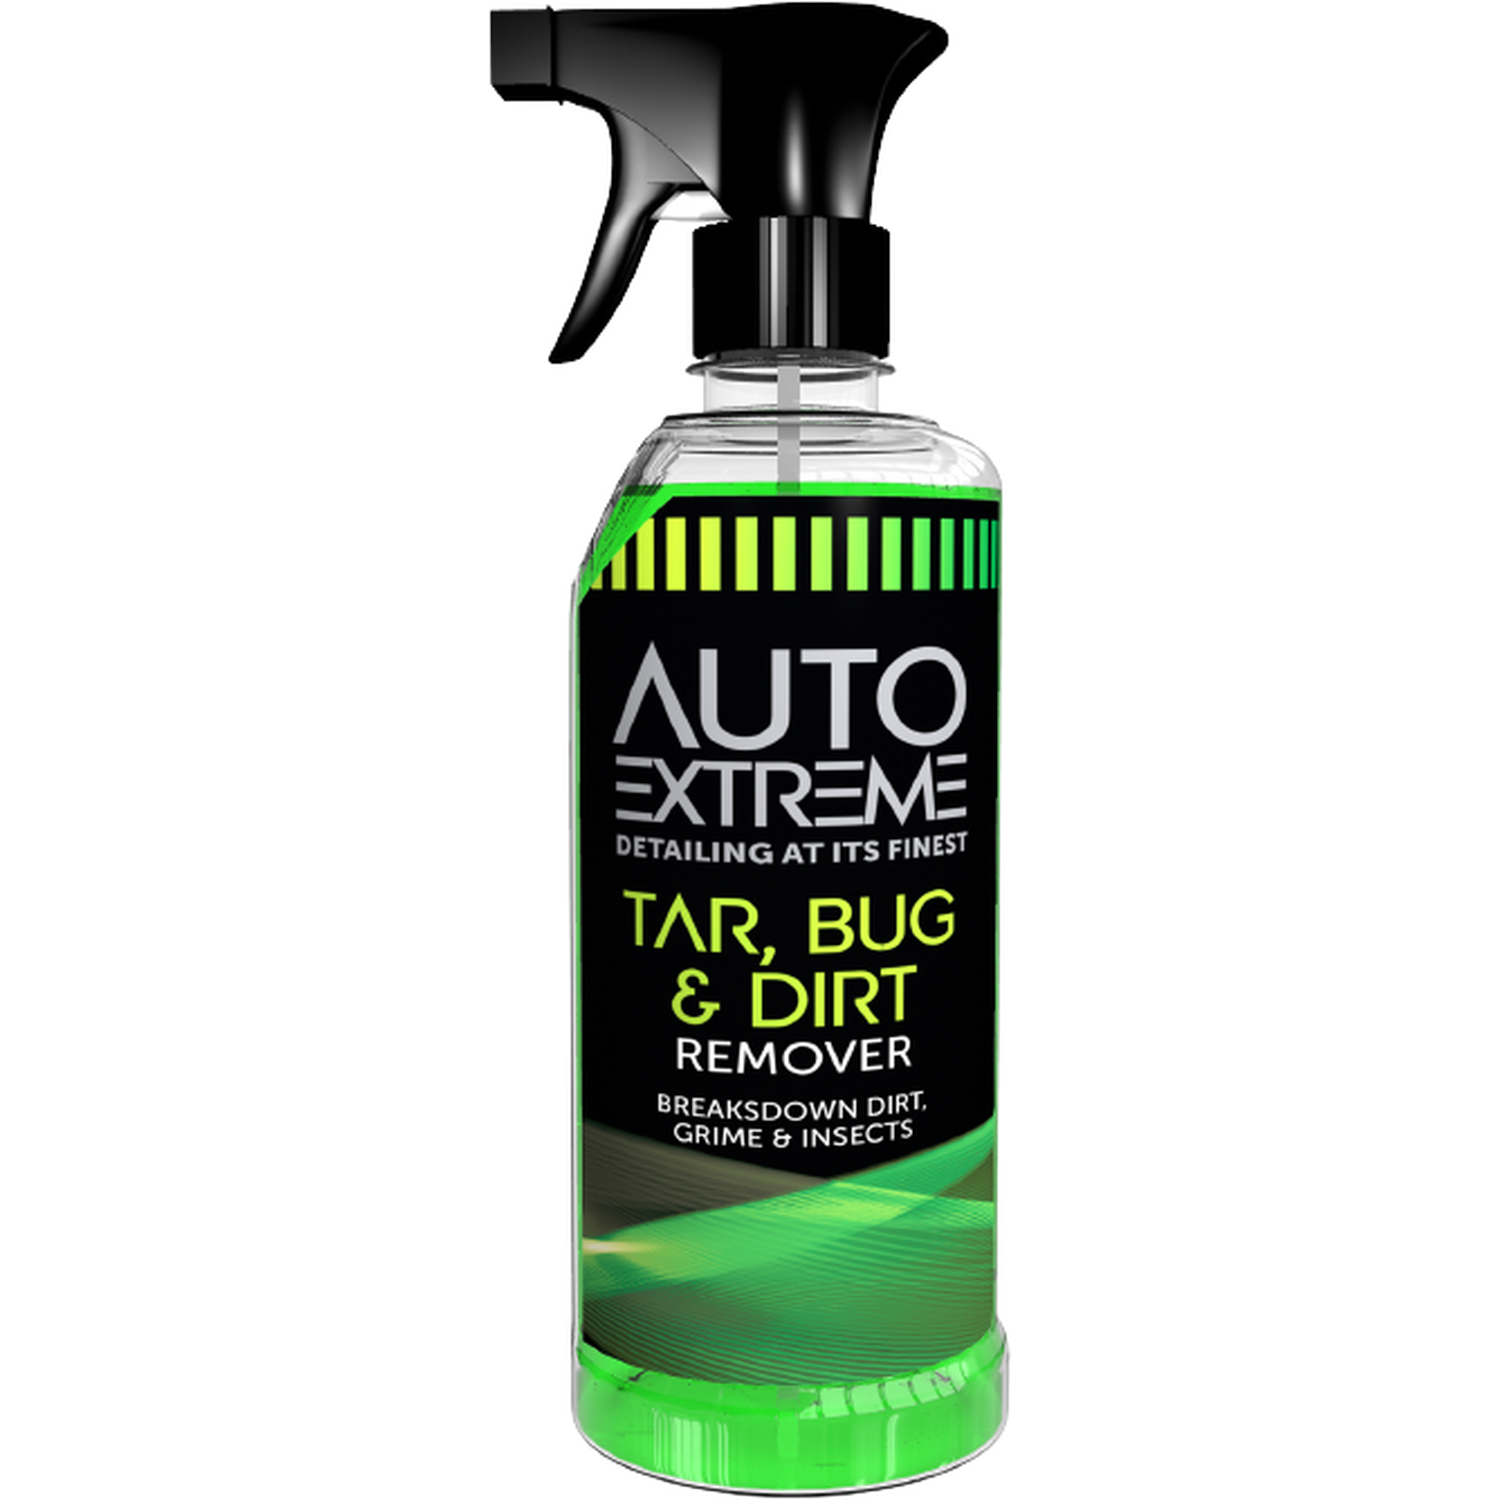 Auto Extreme Green Tar Bug and Dirt Remover Image